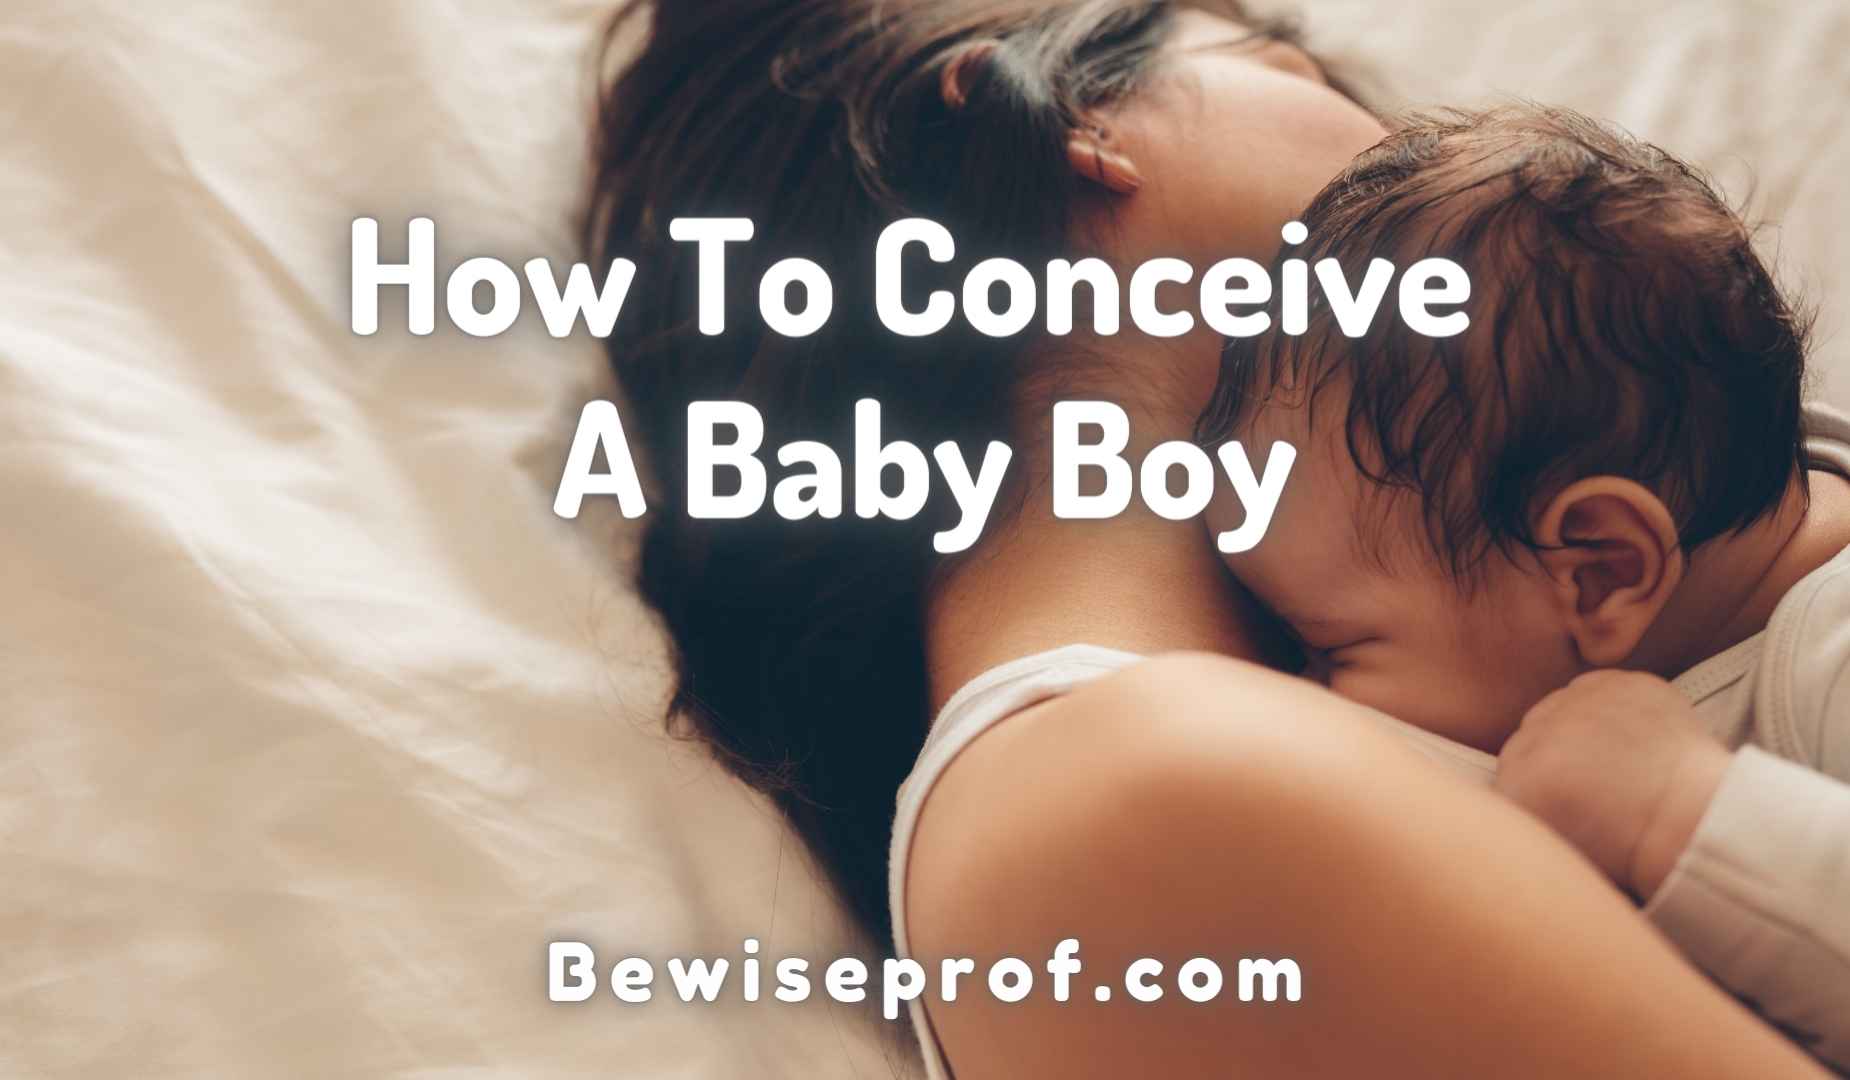 How To Conceive A Baby Boy